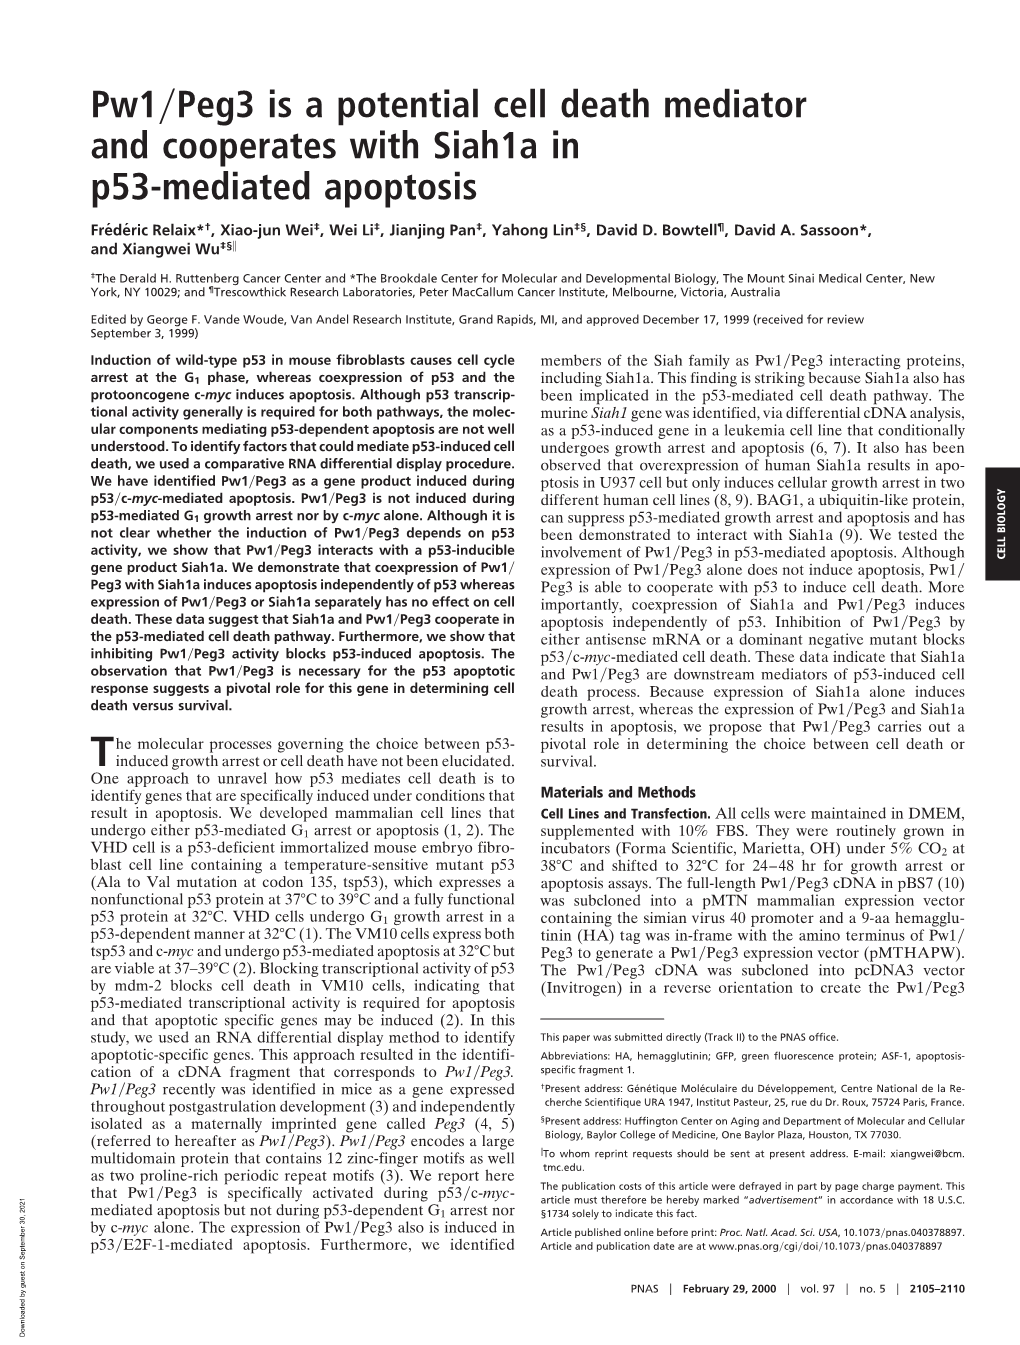 Pw1 Peg3 Is a Potential Cell Death Mediator and Cooperates With